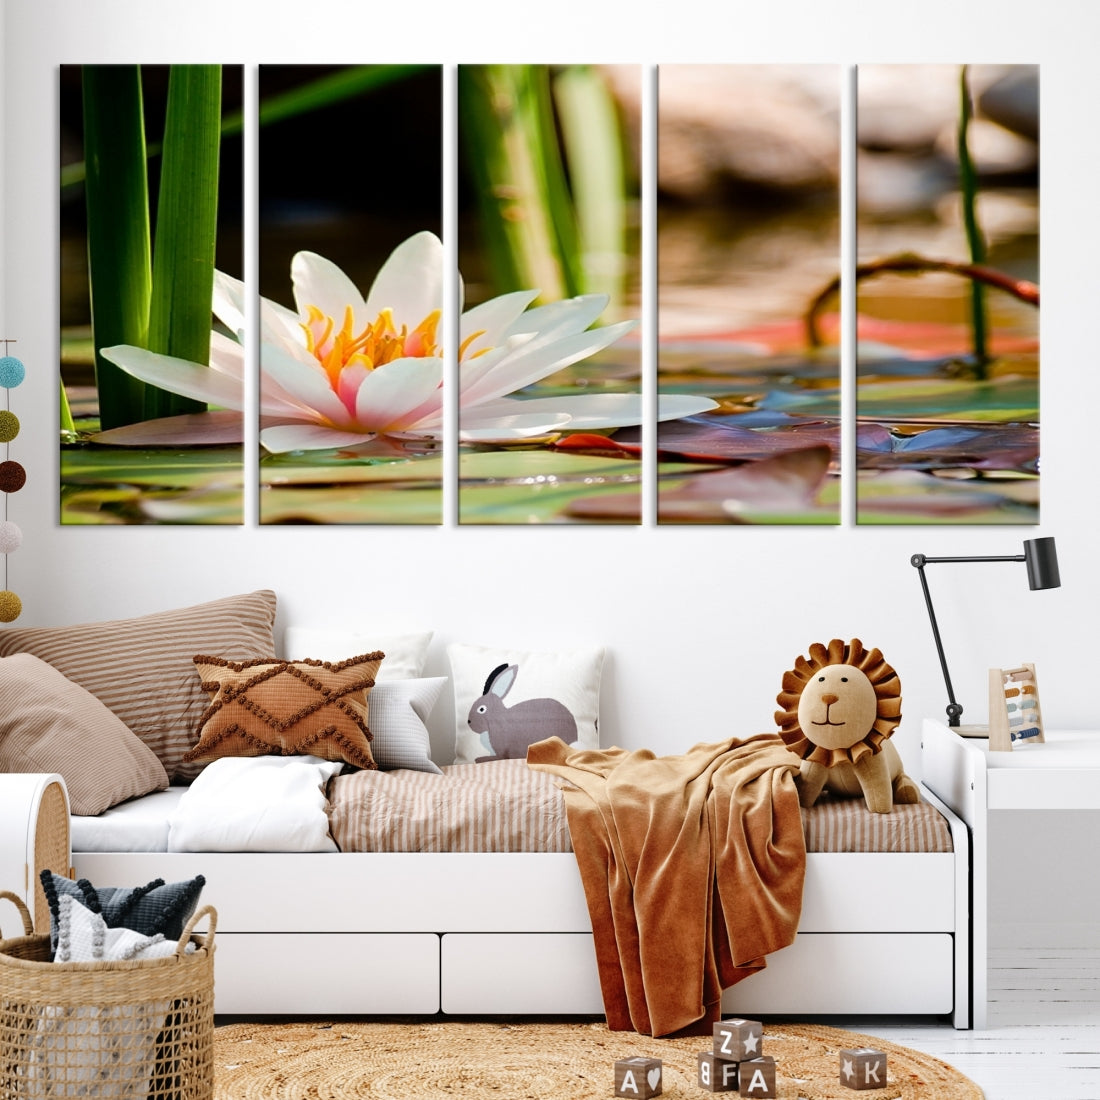 White Lotus Flower on Water Lily